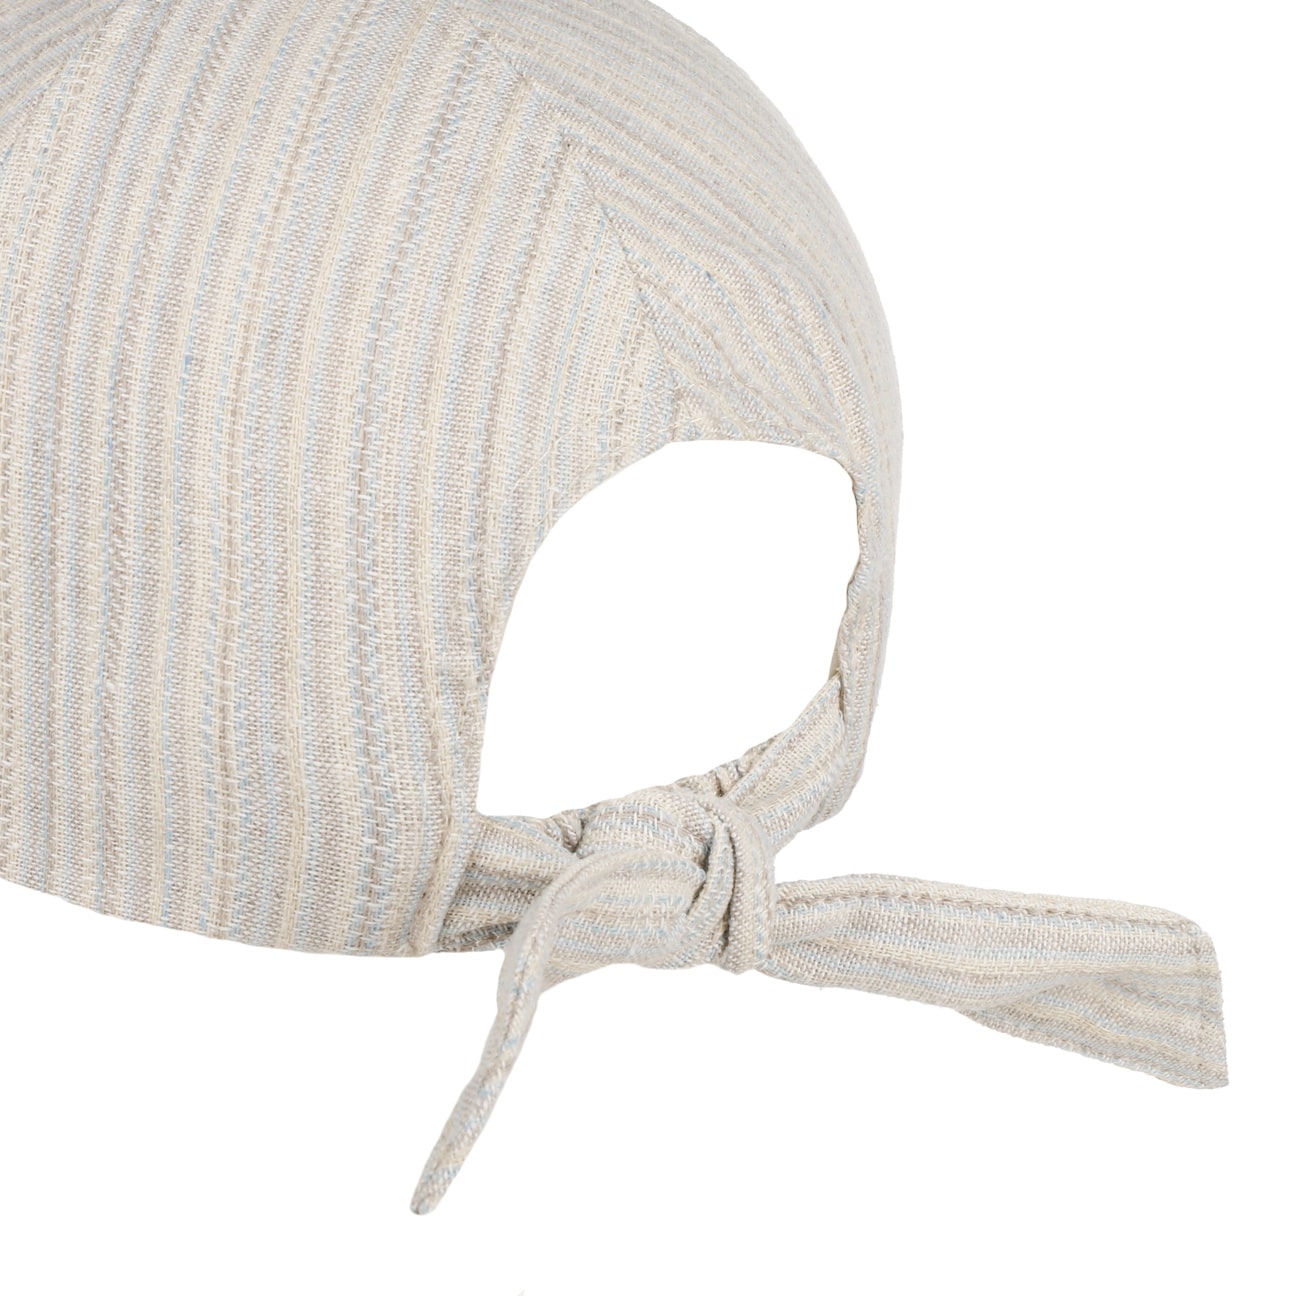 Fine Stripes Sommercap 39,95 € by Seeberger 